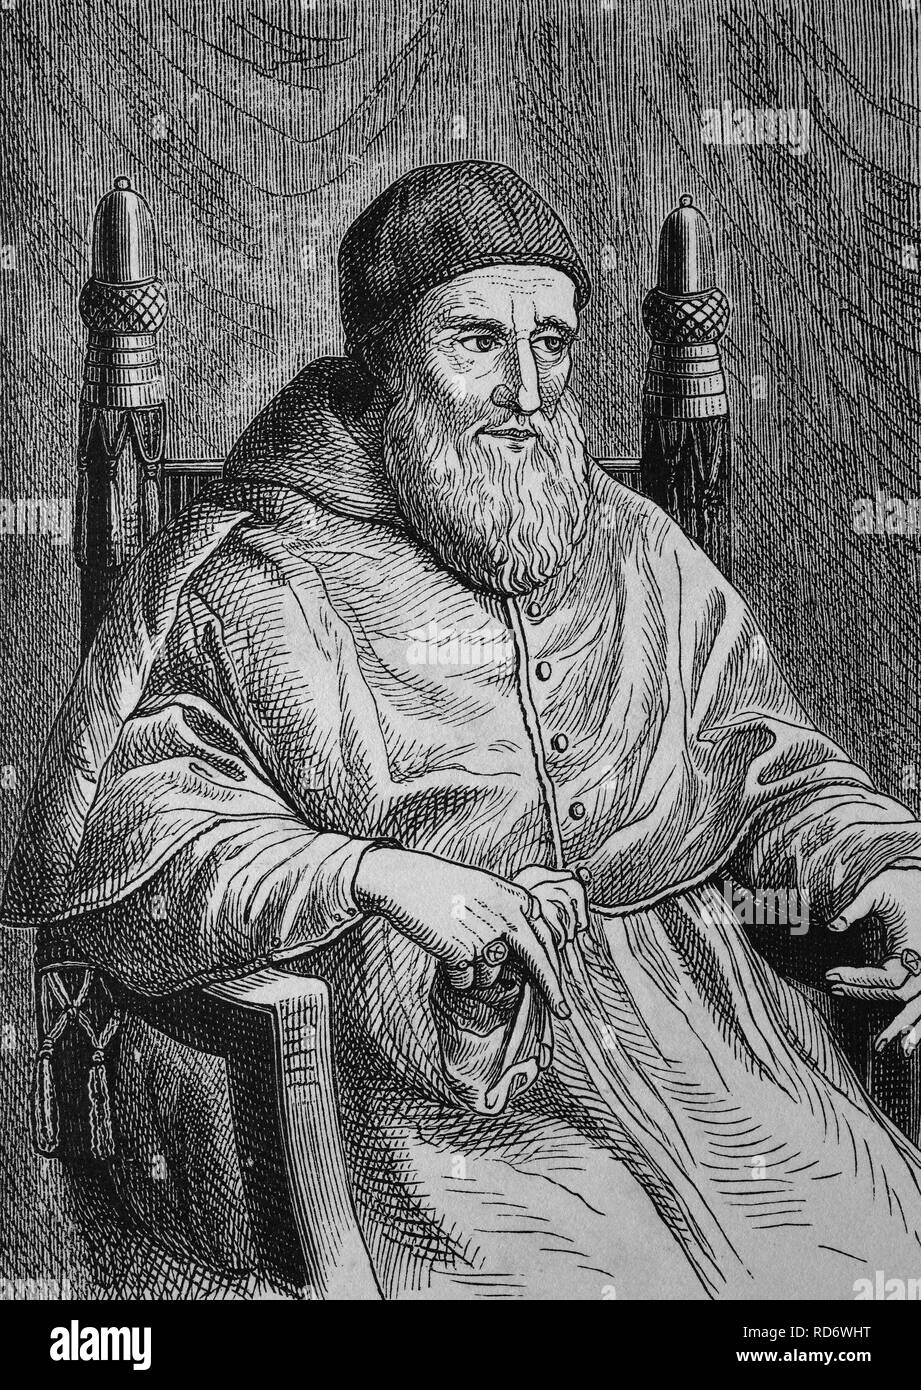 Giuliano della Rovere, Pope Julius II, 1443 - 1513, he was pope from 1503 untill 1513, founder of the Swiss Guard Stock Photo